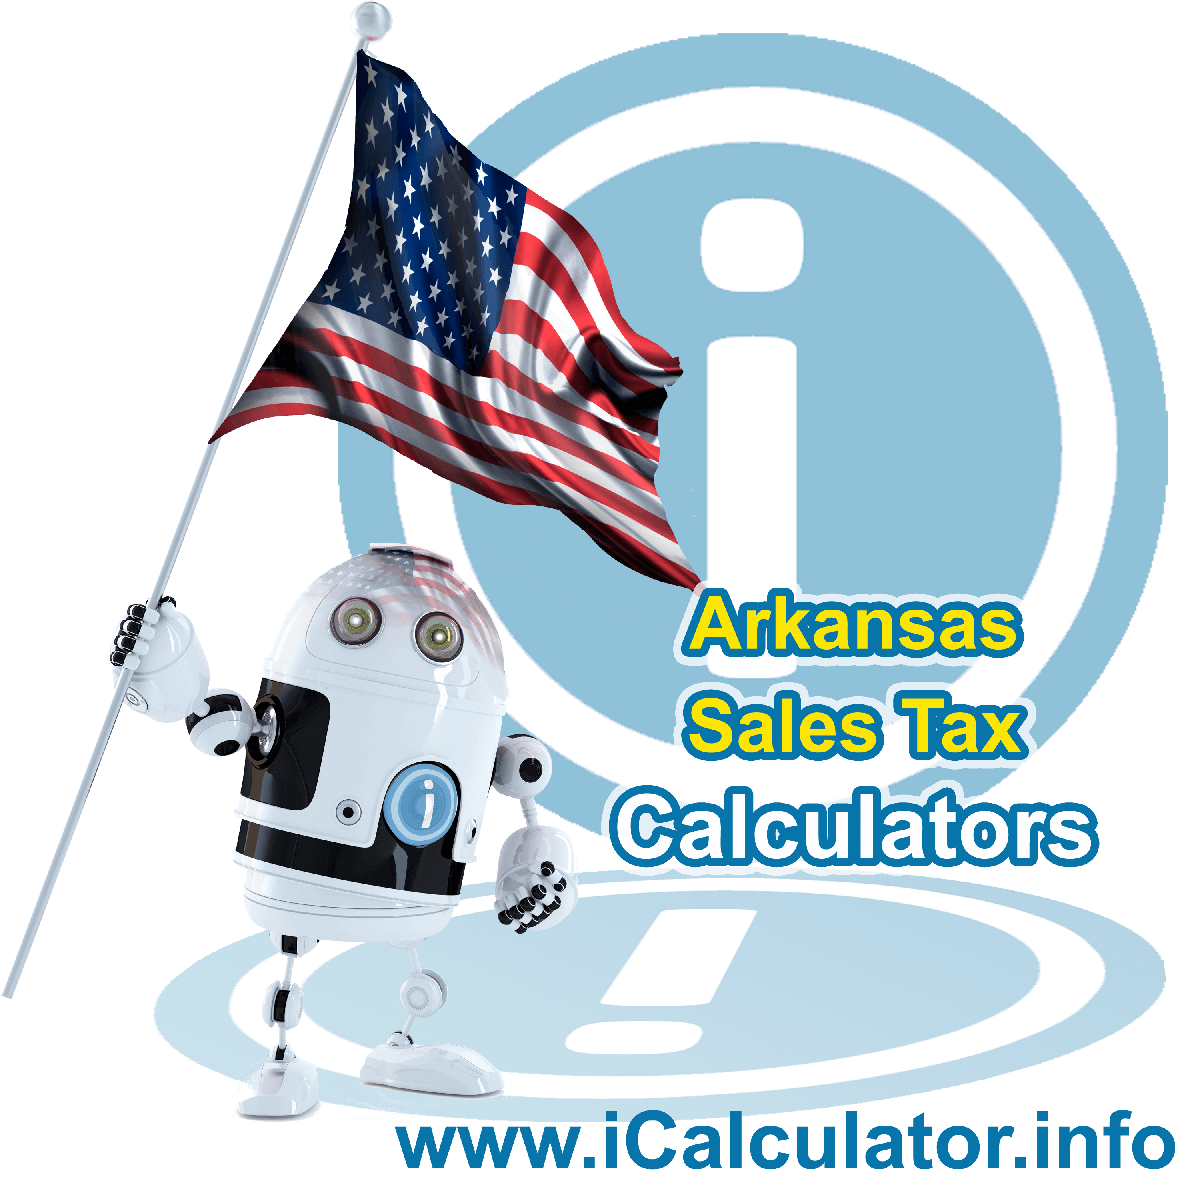 Cotton Plant Sales Rates: This image illustrates a calculator robot calculating Cotton Plant sales tax manually using the Cotton Plant Sales Tax Formula. You can use this information to calculate Cotton Plant Sales Tax manually or use the Cotton Plant Sales Tax Calculator to calculate sales tax online.